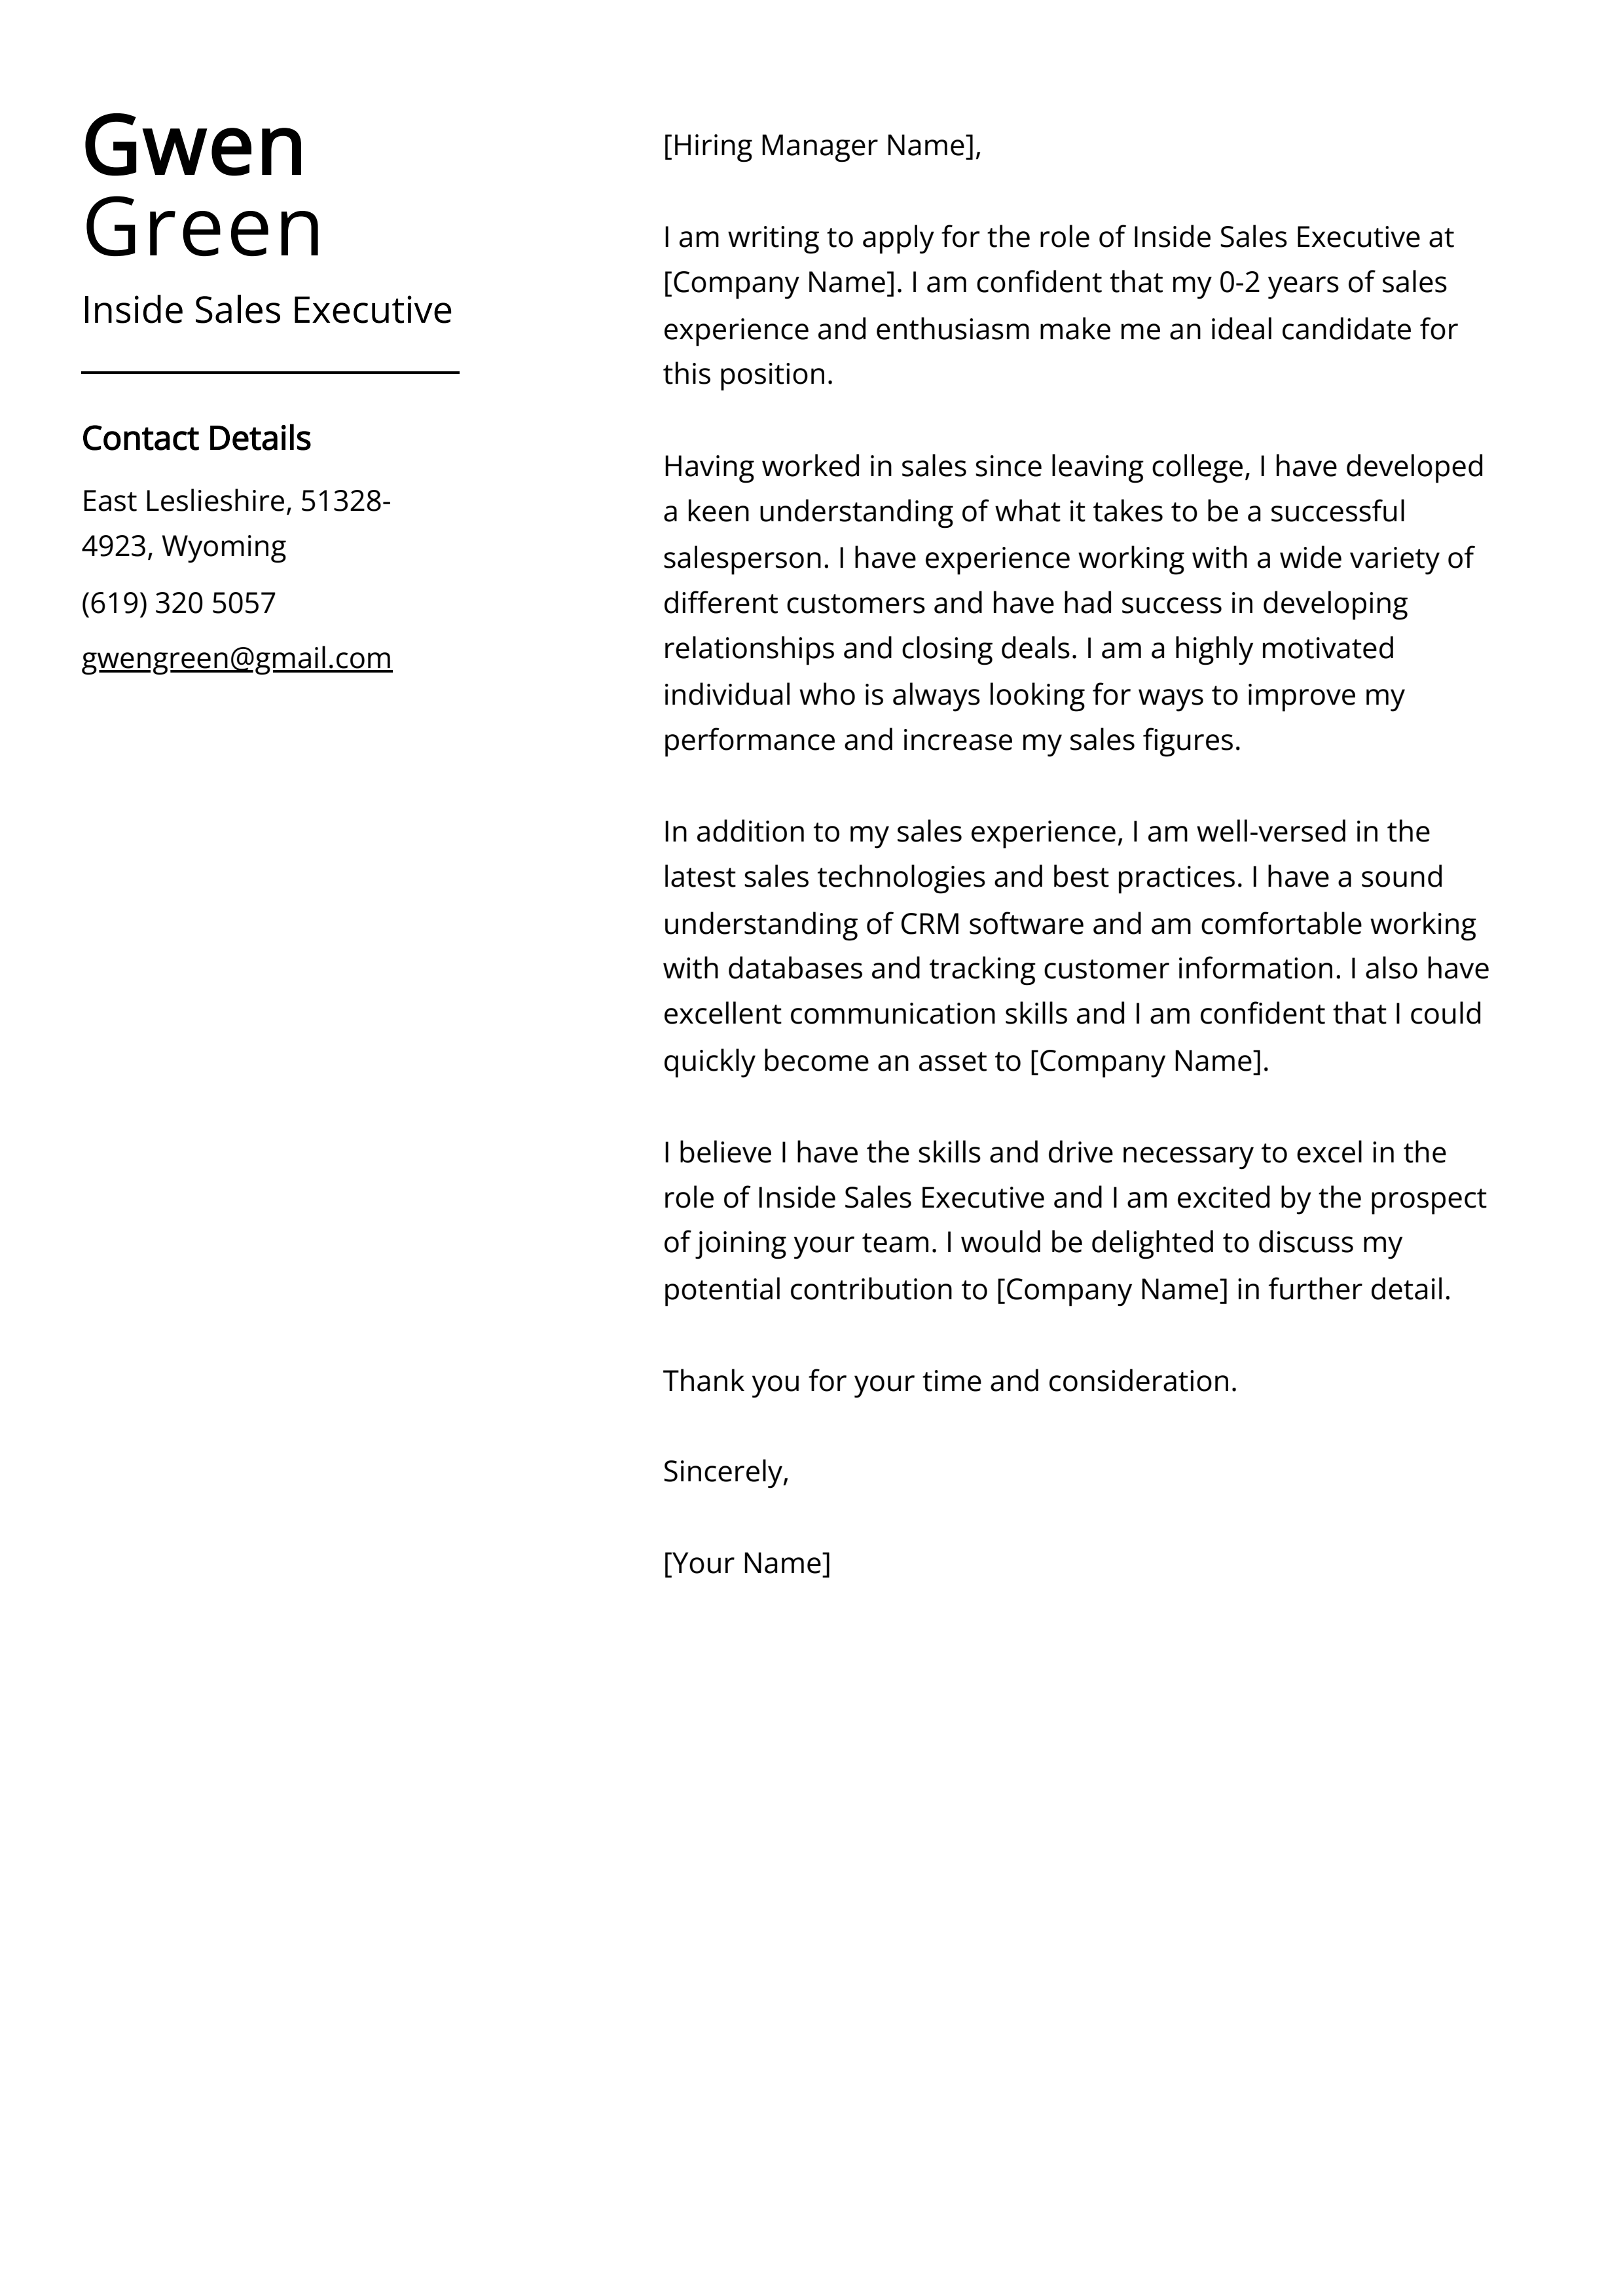 Inside Sales Executive Cover Letter Example